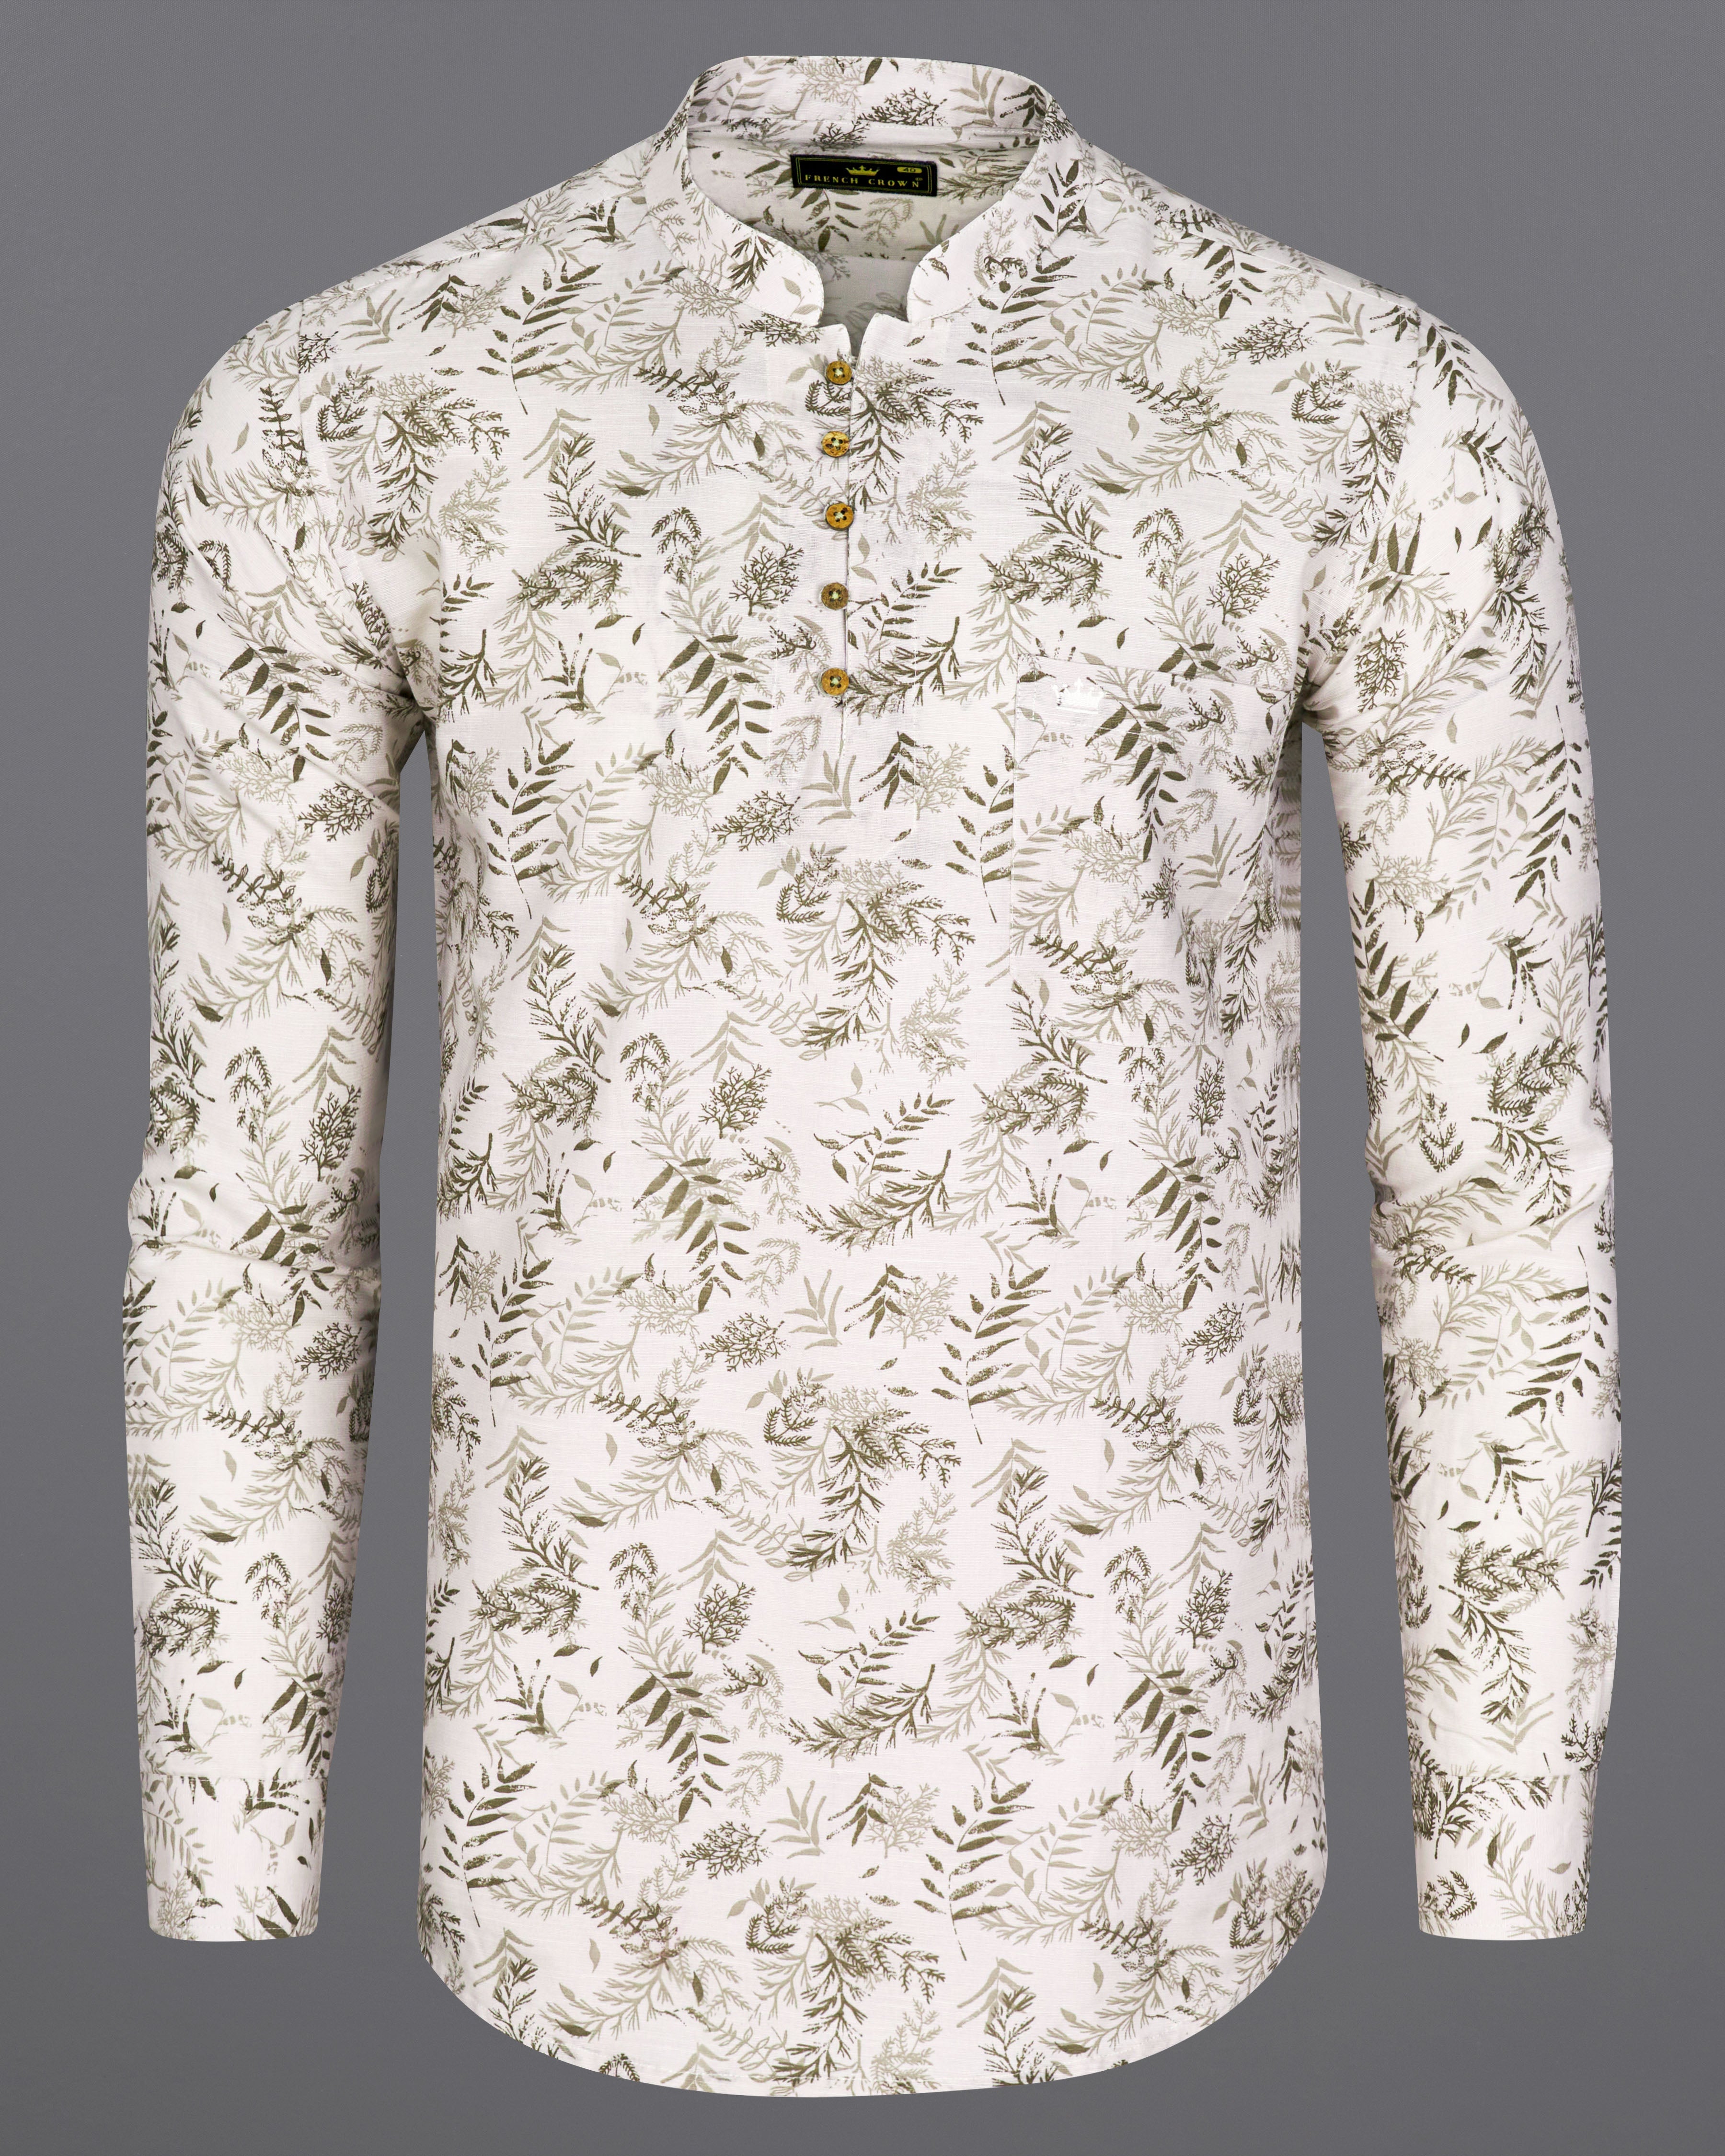 Mercury White with Leaves Printed Luxurious Linen Shirt  8790-KS-38,8790-KS-H-38,8790-KS-39,8790-KS-H-39,8790-KS-40,8790-KS-H-40,8790-KS-42,8790-KS-H-42,8790-KS-44,8790-KS-H-44,8790-KS-46,8790-KS-H-46,8790-KS-48,8790-KS-H-48,8790-KS-50,8790-KS-H-50,8790-KS-52,8790-KS-H-52